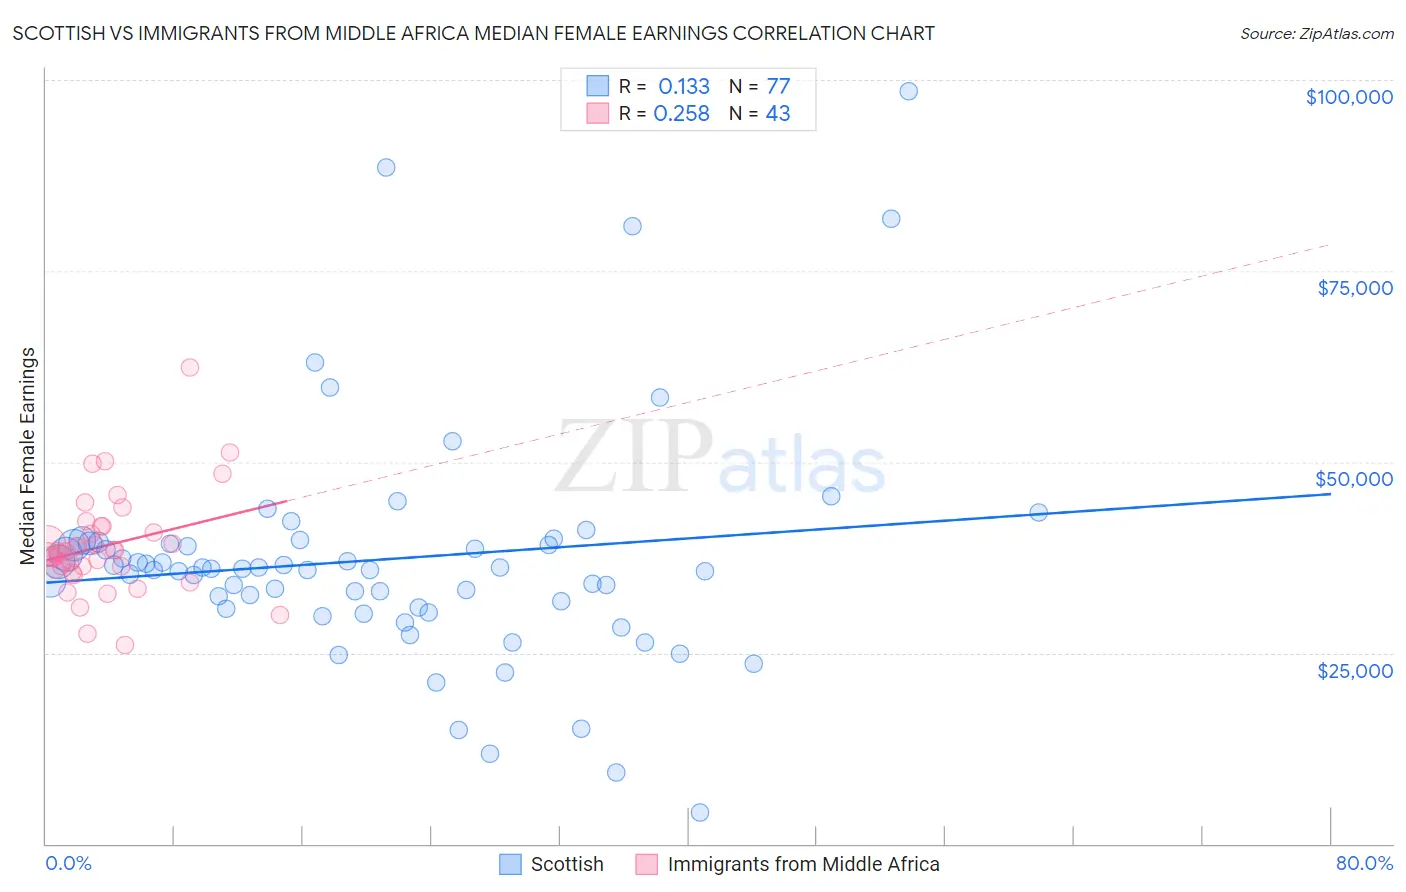 Scottish vs Immigrants from Middle Africa Median Female Earnings